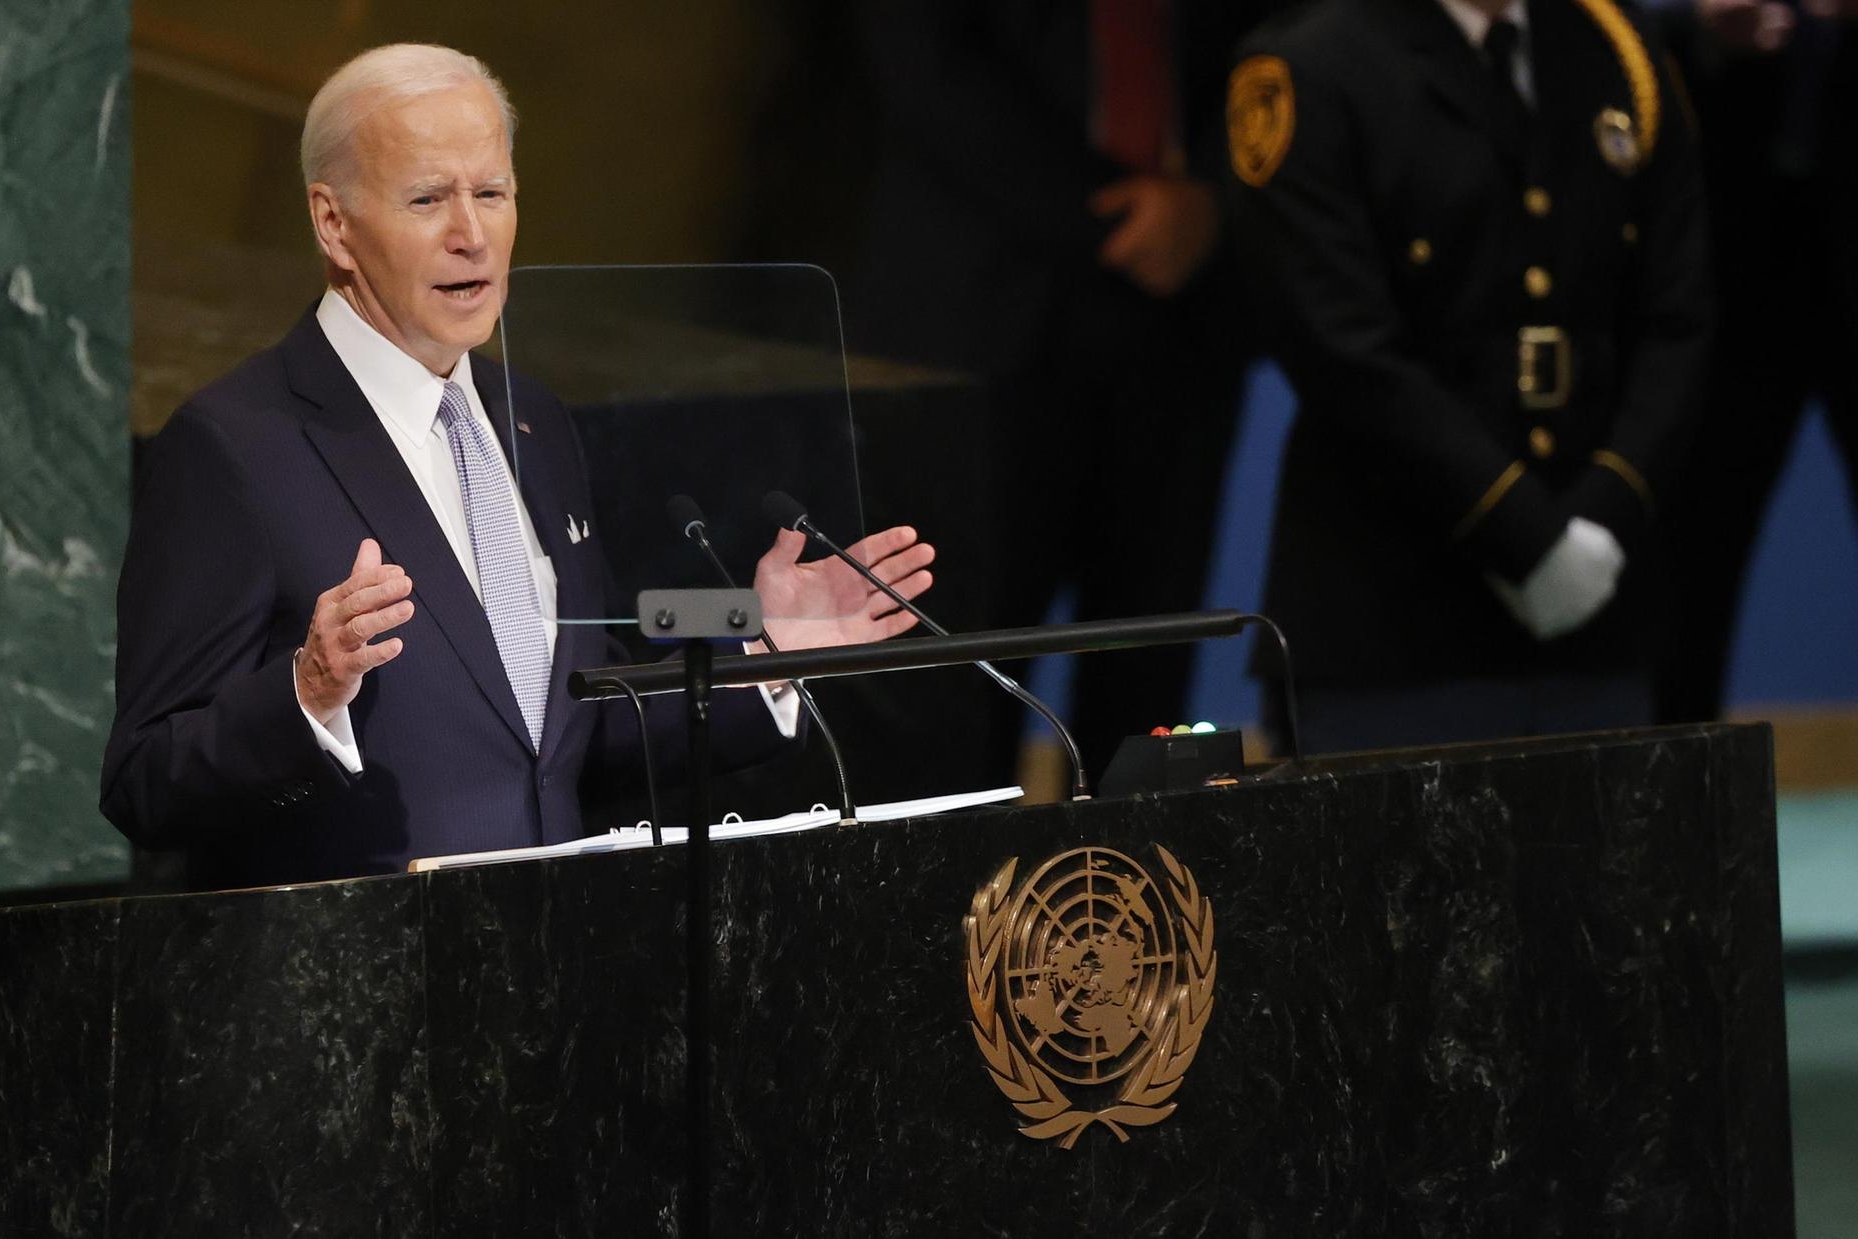 epa10197090 President Joseph Biden of the US delivers his address during the 77th General Debate inside the General Assembly Hall at United Nations Headquarters in New York, New York, USA, 21 September 2022. EPA/JASON SZENES